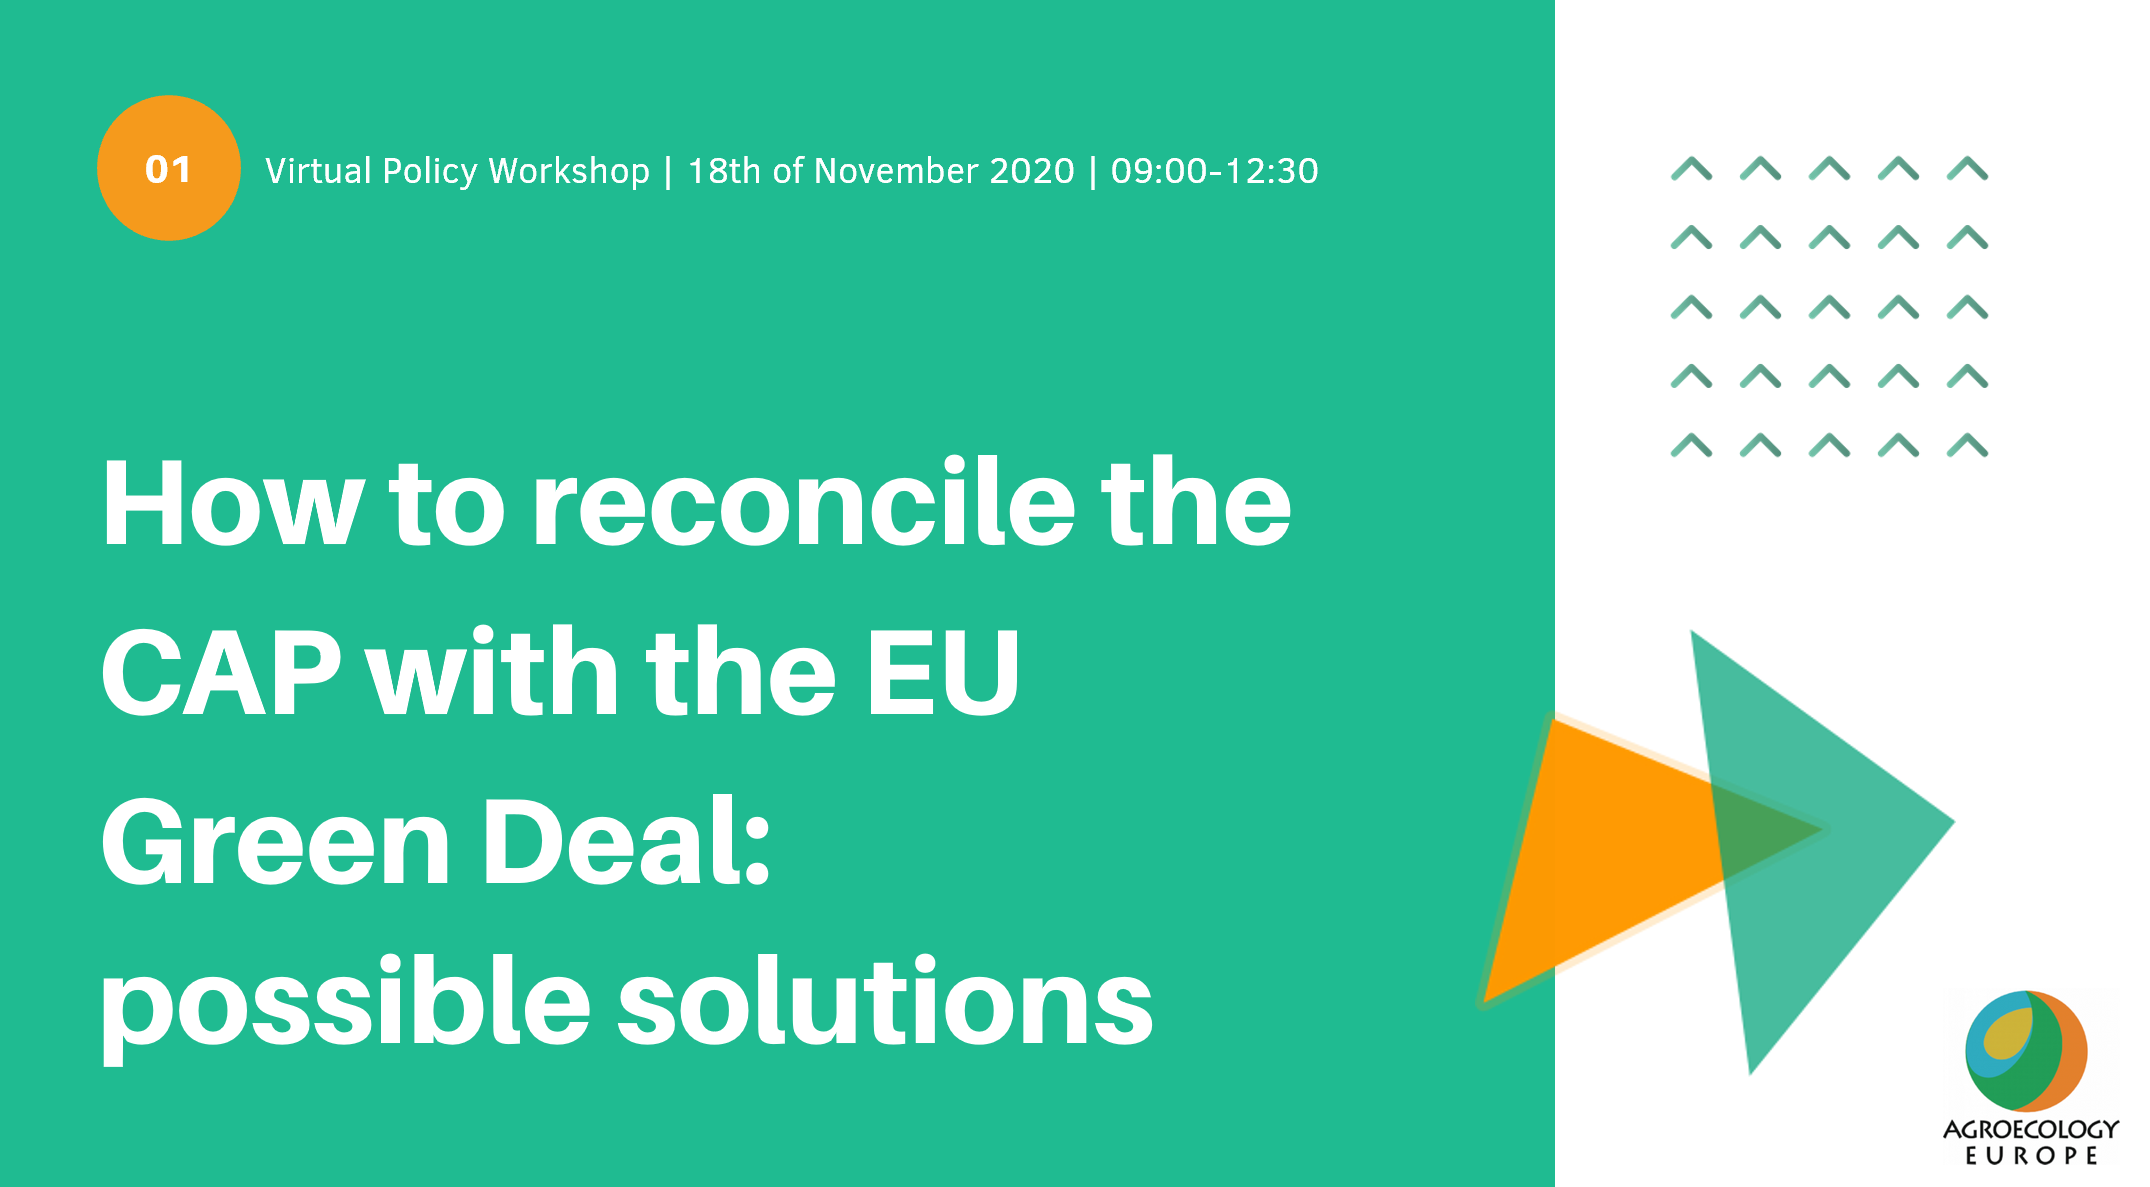 Virtual Policy Workshop: “How to reconcile the Common Agriculture Policy (CAP) with the EU Green Deal: possible solutions?”, Wednesday 18th of November 2020